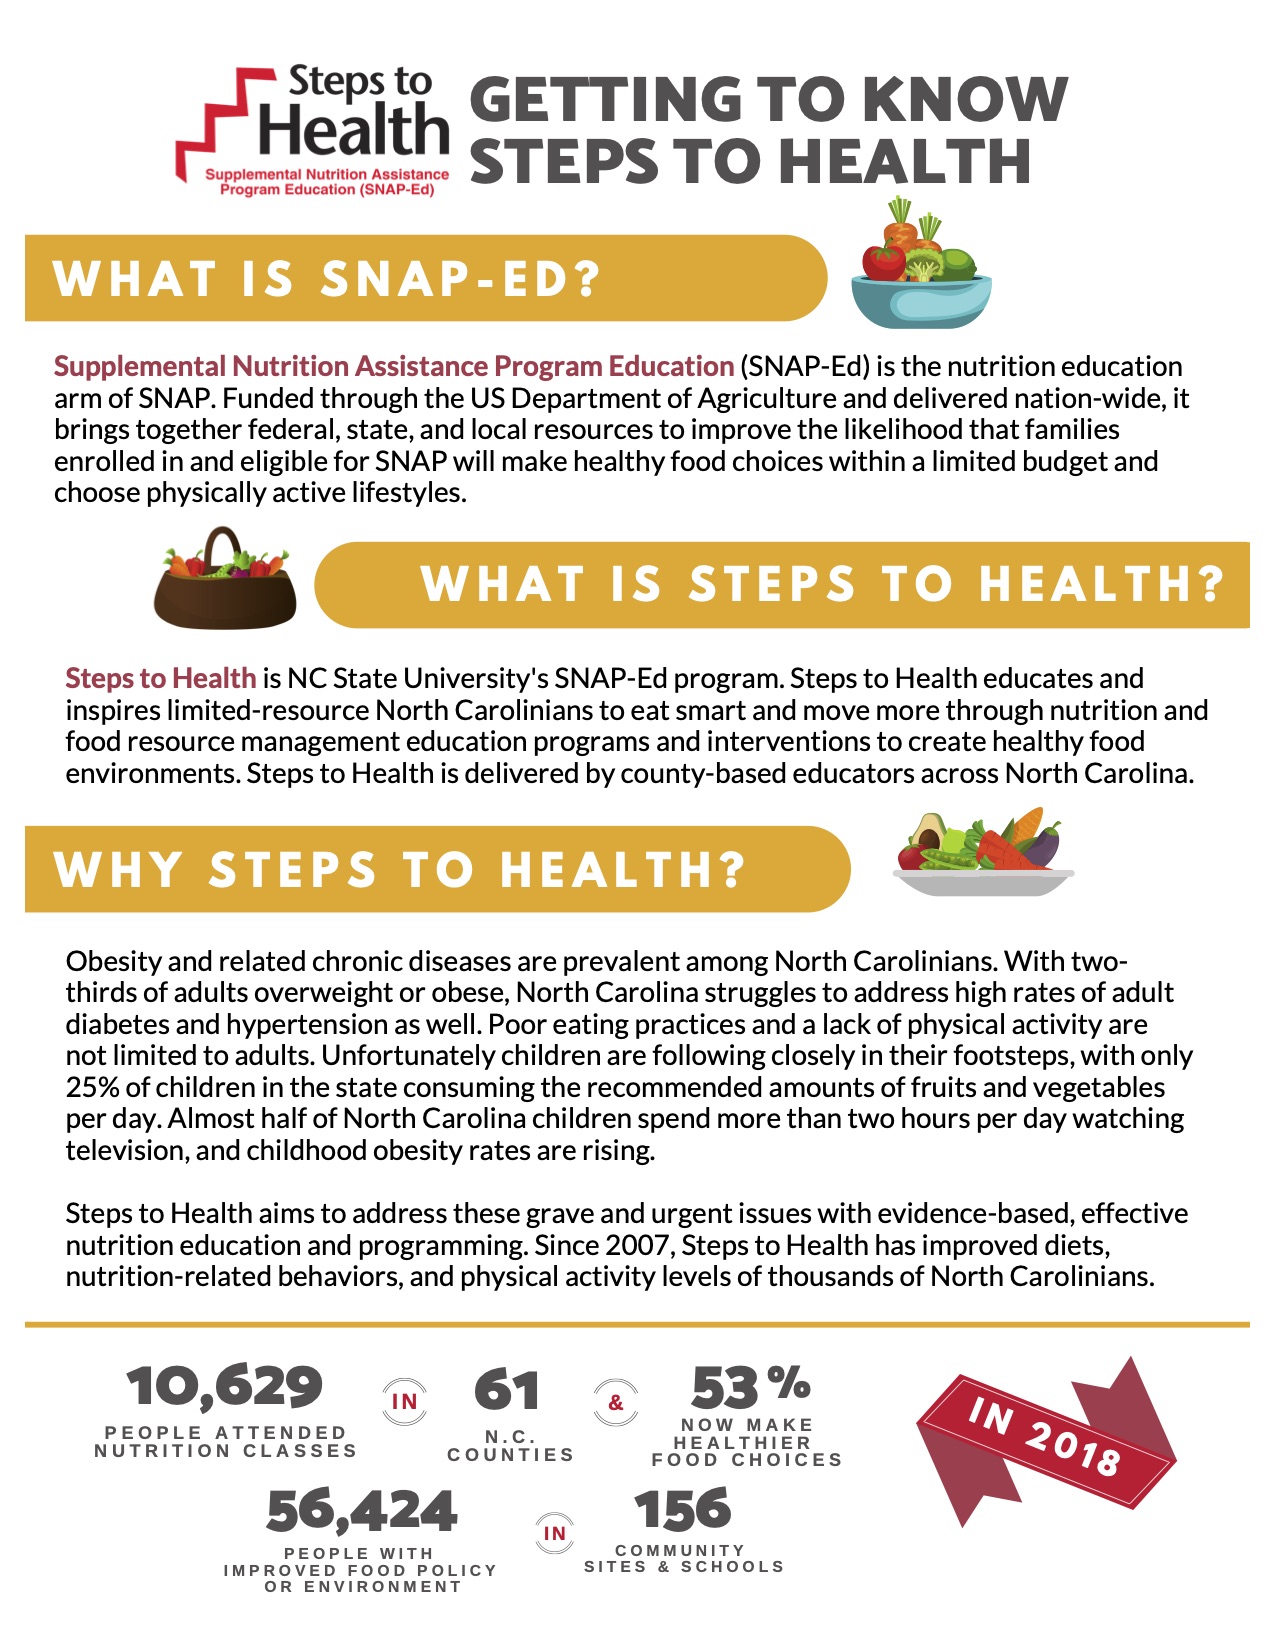 Steps to Health flyer image